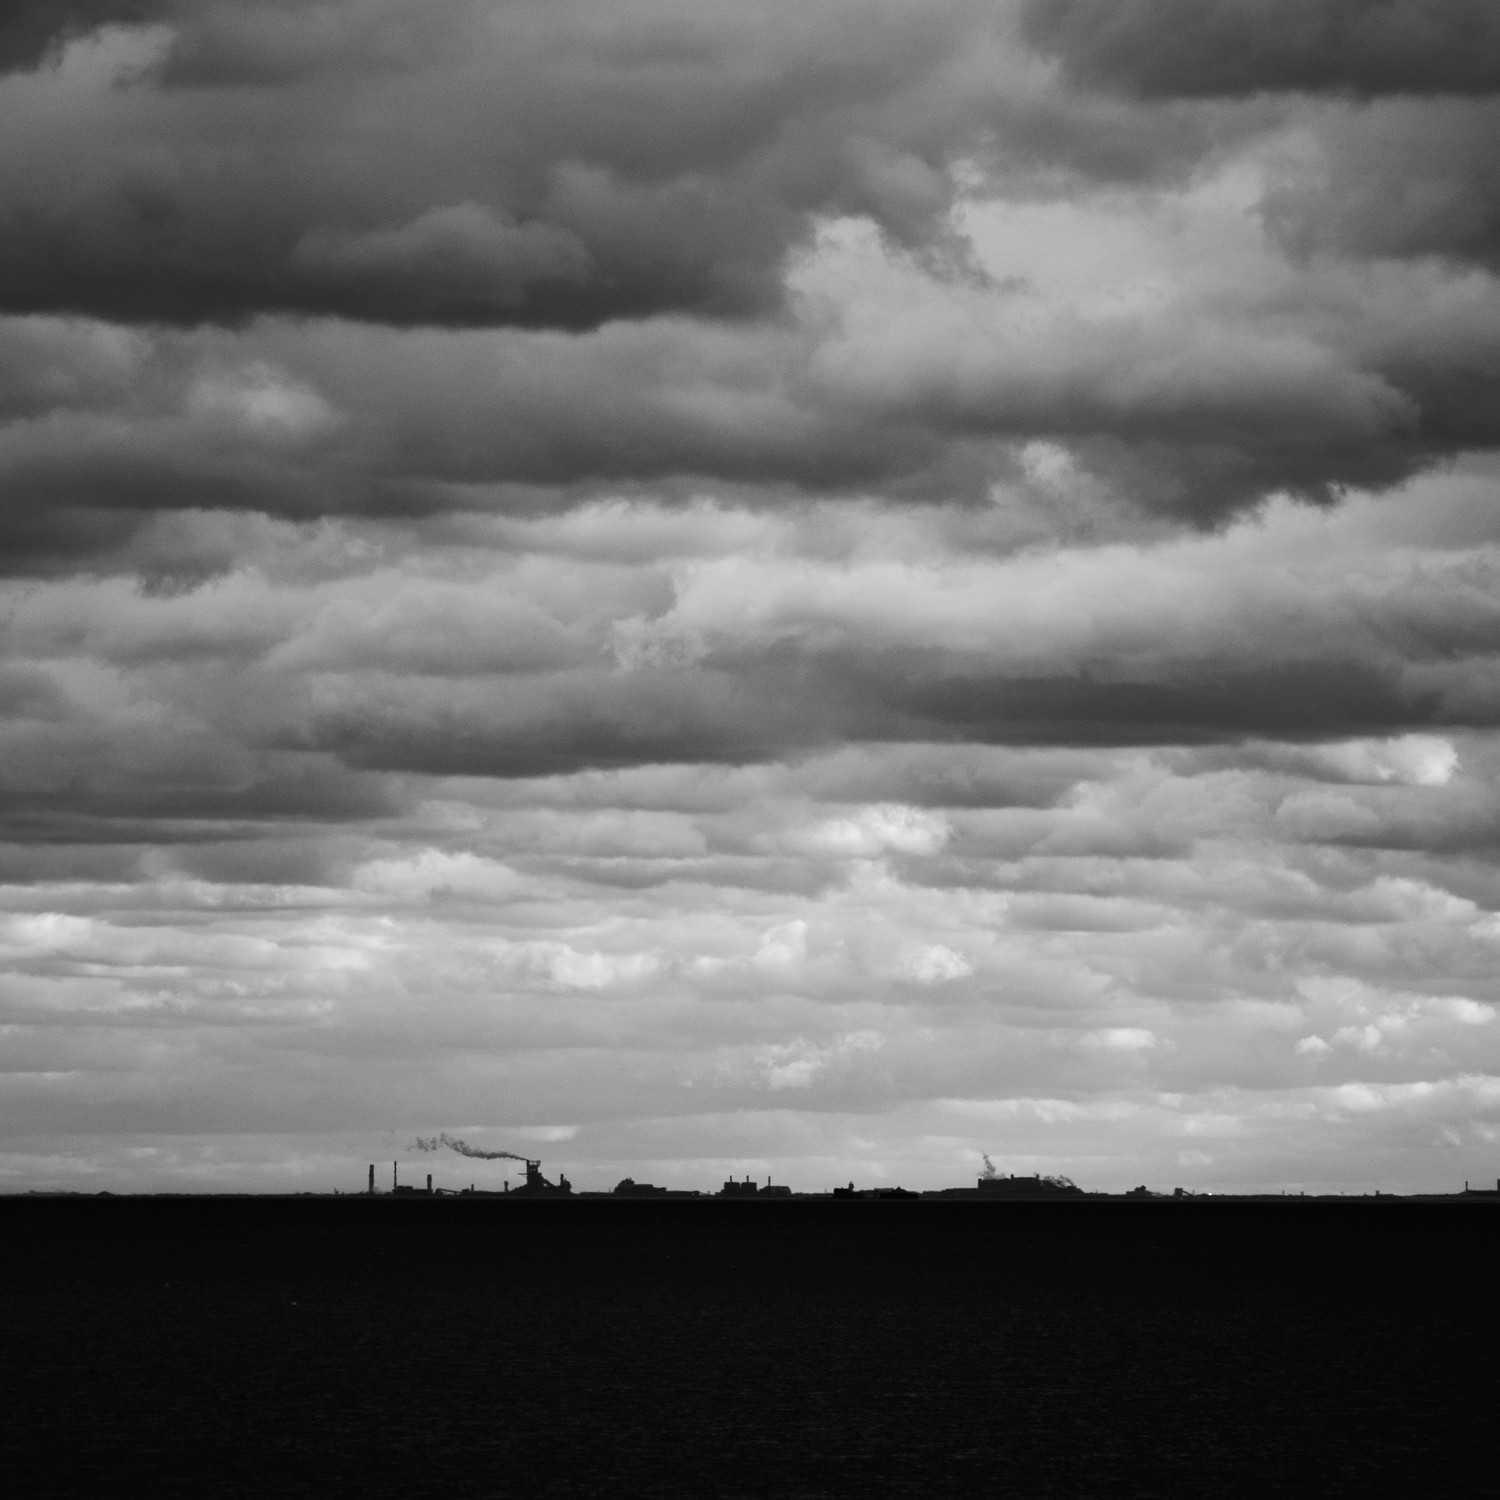 Distant industrial buildings silhouetted against a cloudy sky